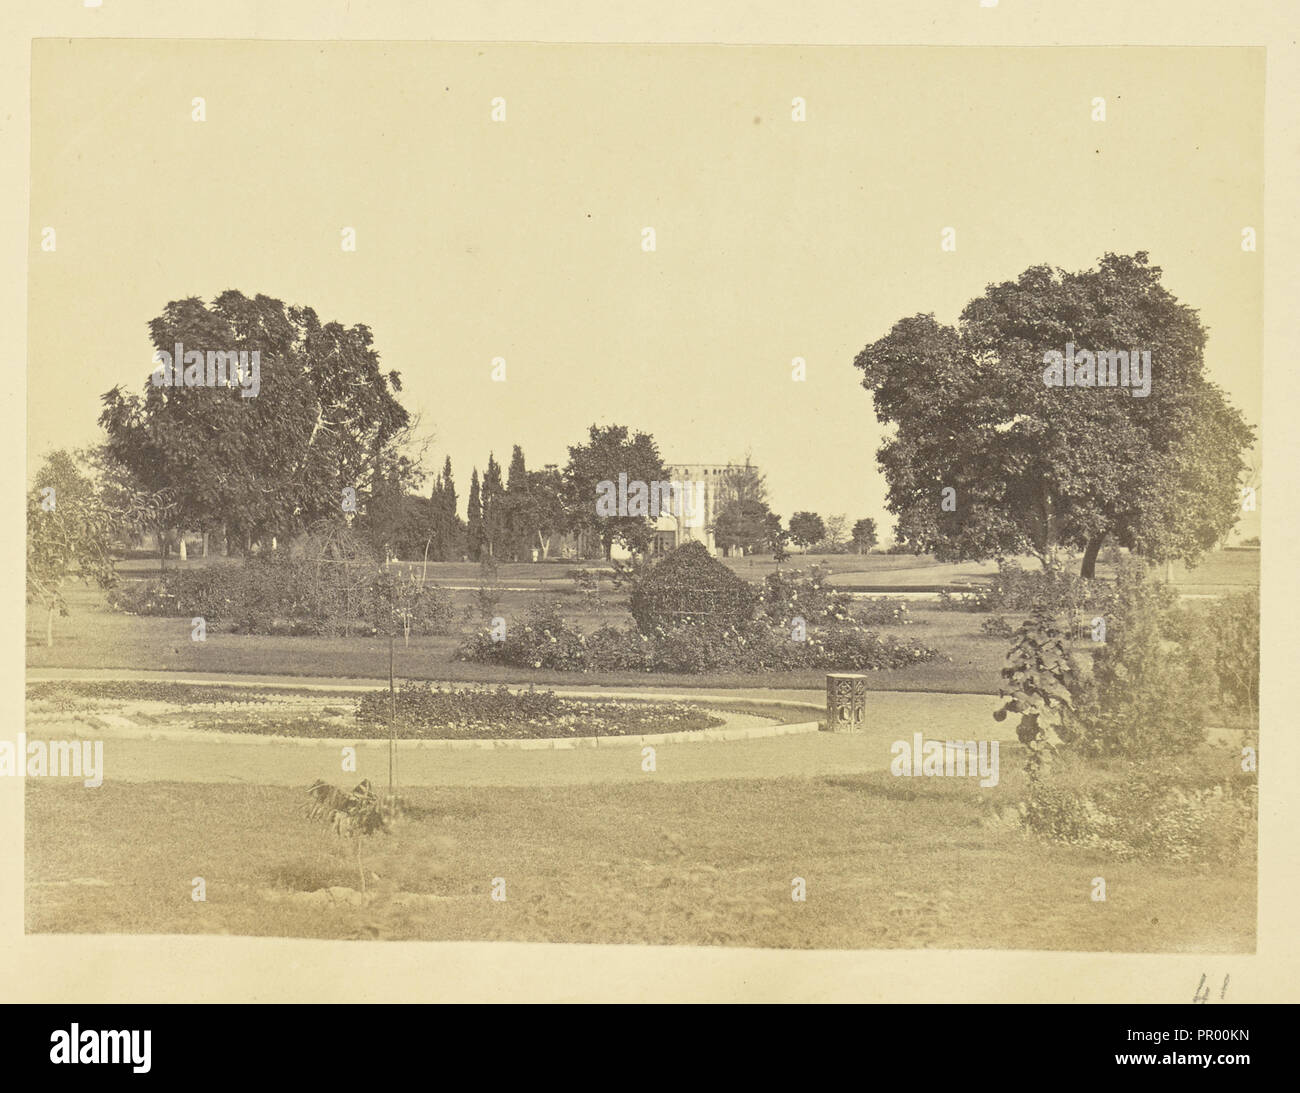 Wingfield Park, Lucknow; Lucknow, India; about 1863 - 1887; Albumen silver print Stock Photo